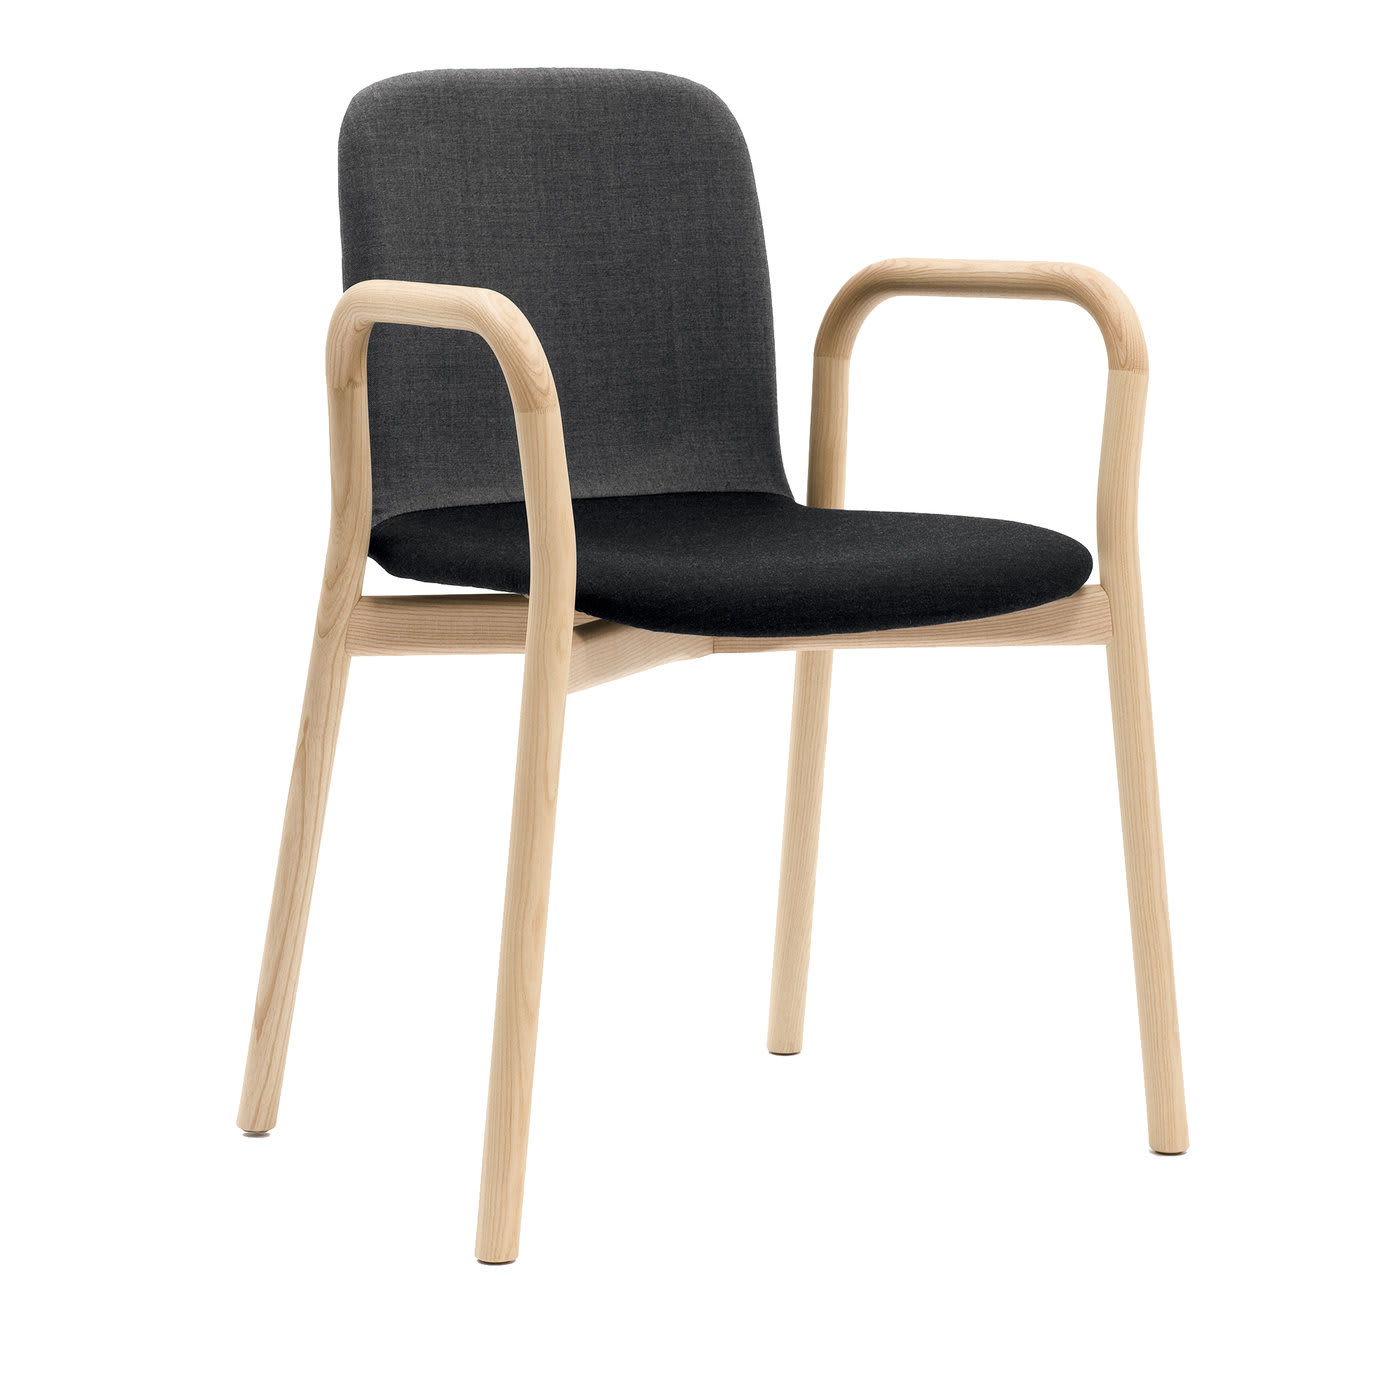 Two Tone Gray and Black Chair - Discipline